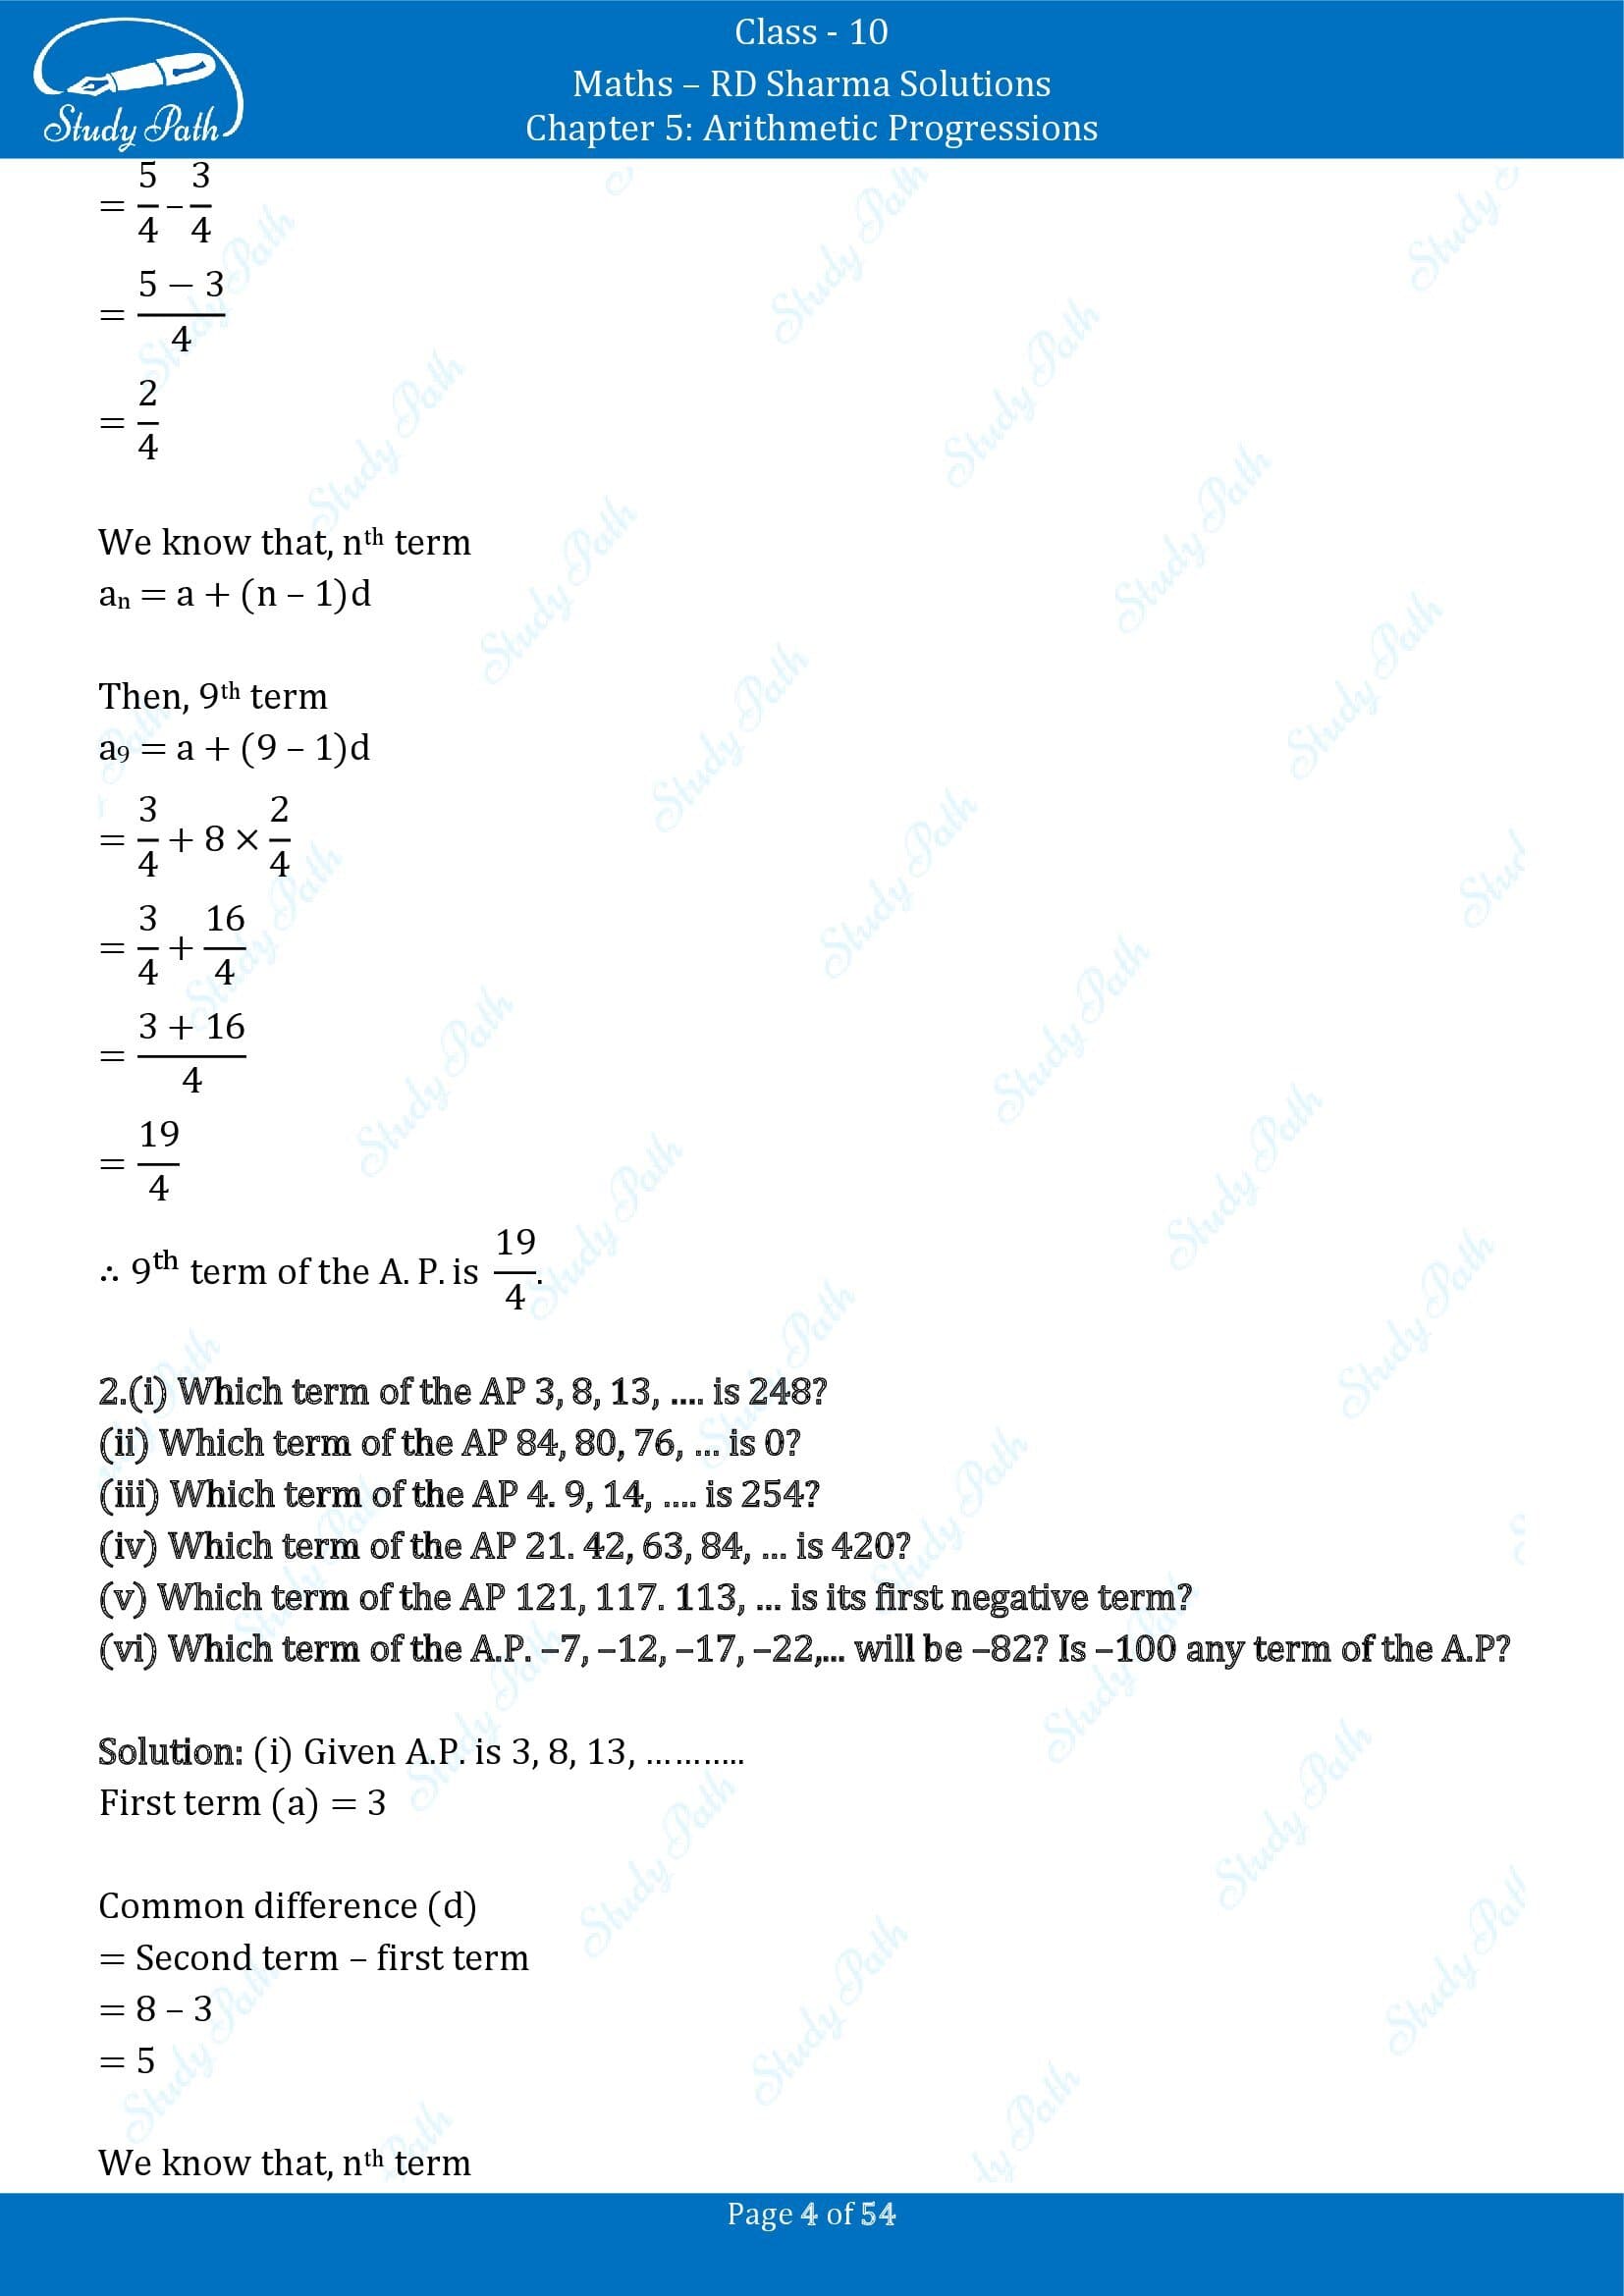 RD Sharma Solutions Class 10 Chapter 5 Arithmetic Progressions Exercise 5.4 00004